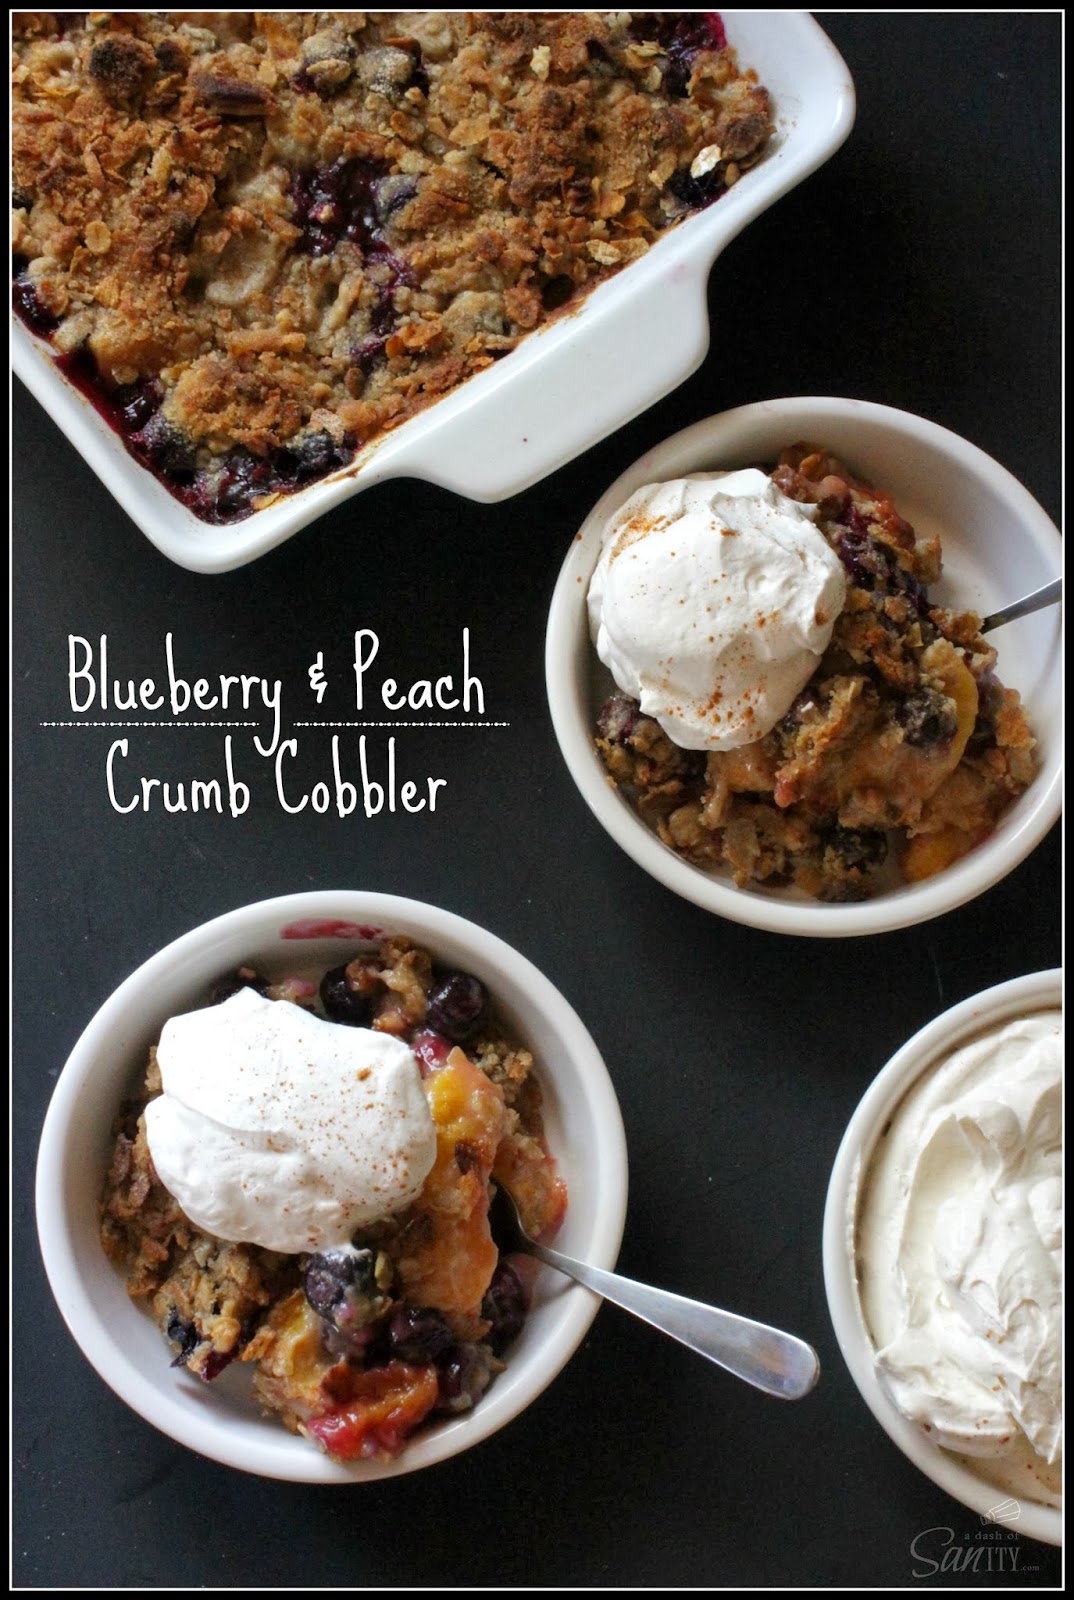 http://www.adashofsanity.com/2014/02/peach-and-blueberry-cobbler-with-crumb-topping/